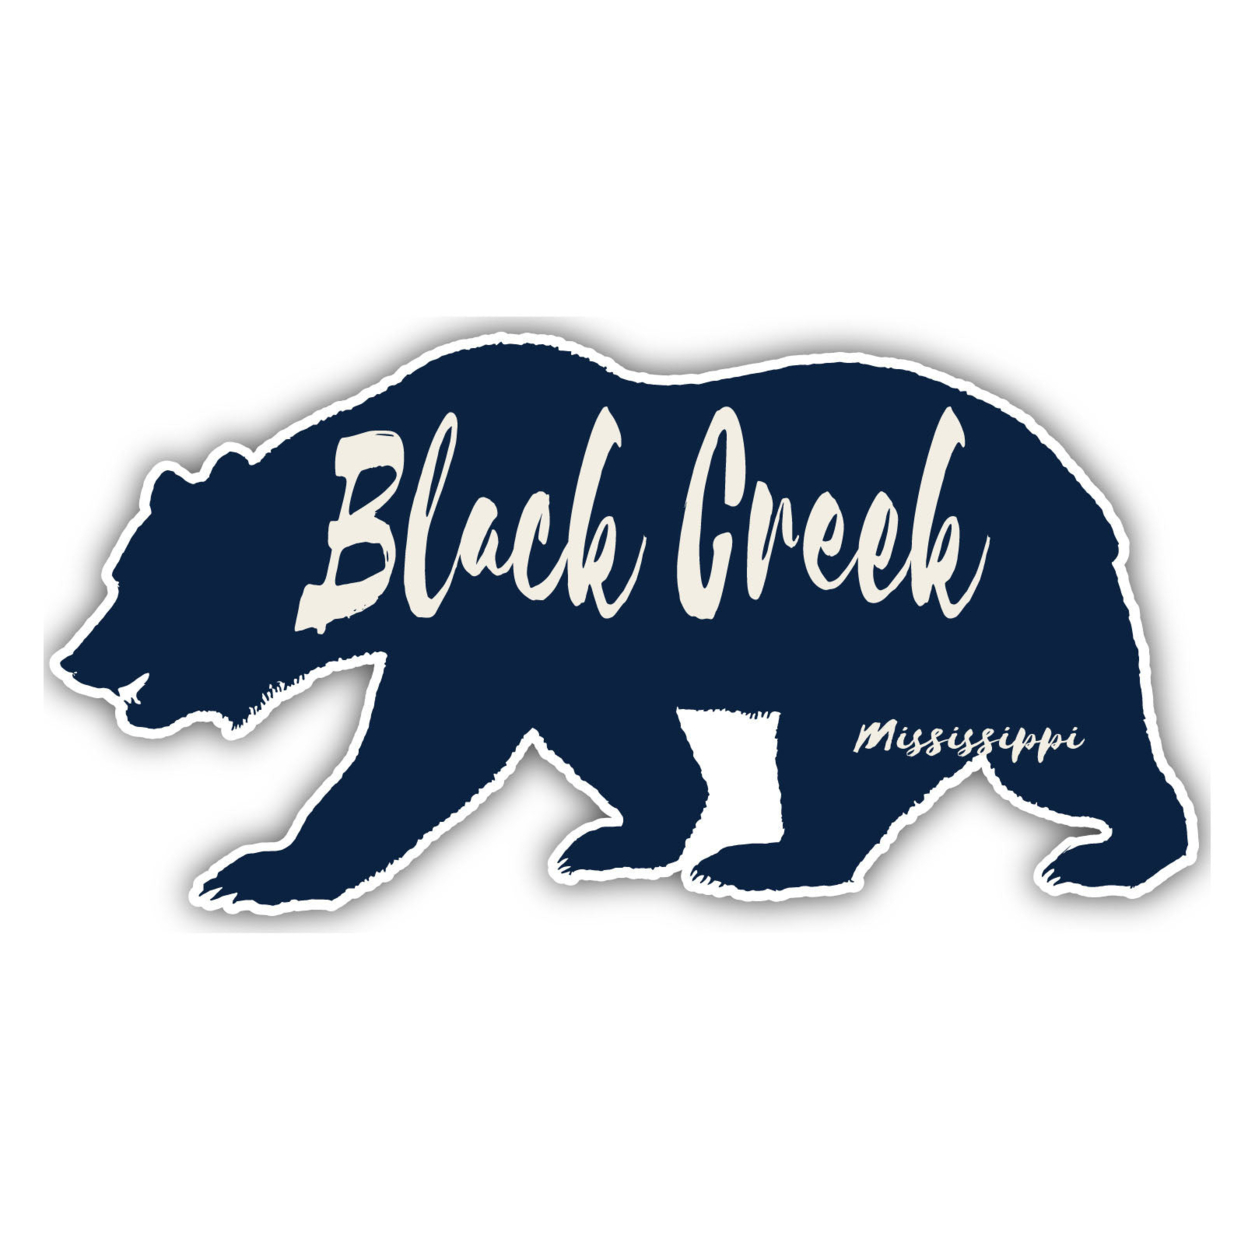 Black Creek Mississippi Souvenir Decorative Stickers (Choose Theme And Size) - 4-Pack, 8-Inch, Bear